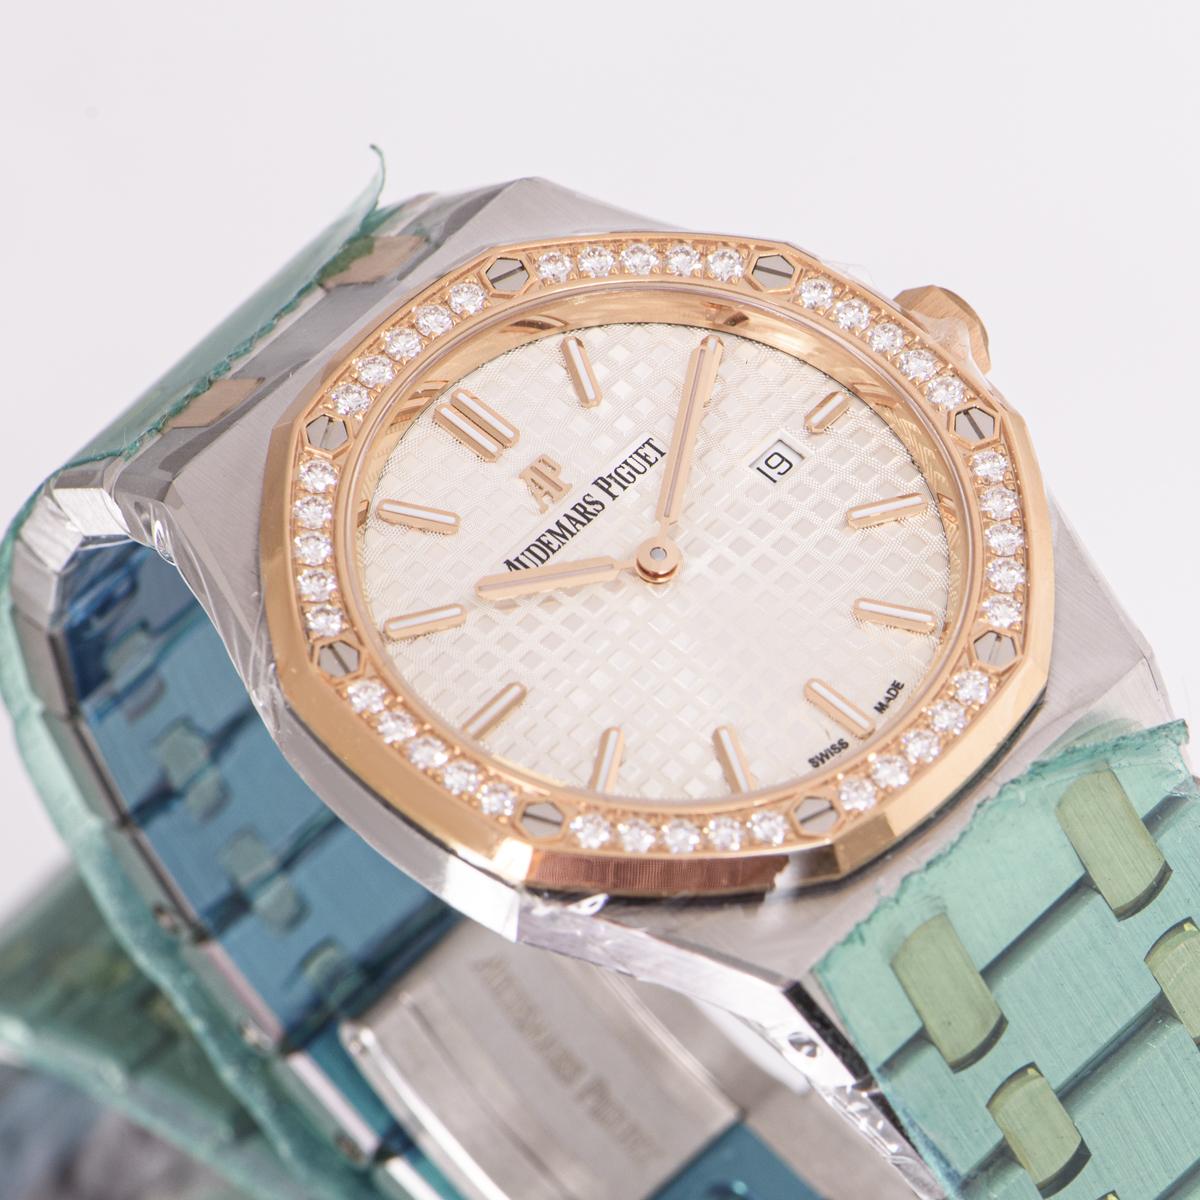 An unworn 33mm Royal Oak Lady in stainless steel and rose gold from Audemars Piguet. Features a silver-toned dial with a 